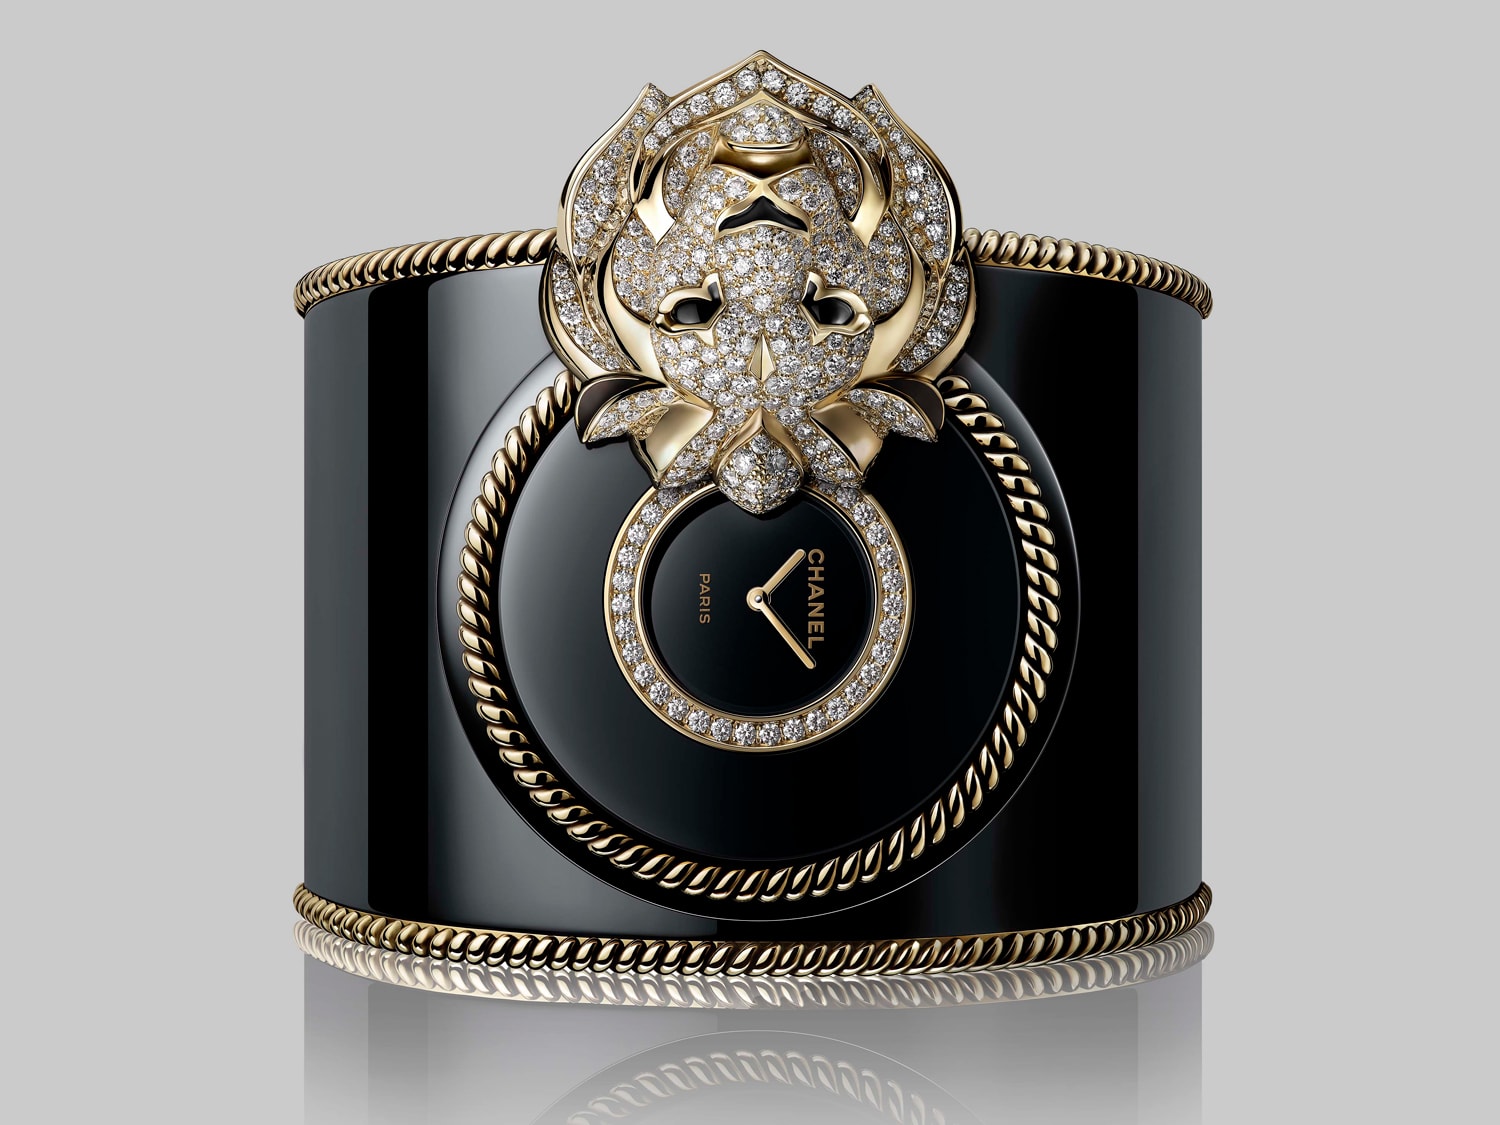 Jewellery watches from Cartier, Chanel, Van Cleef & Arpels and more